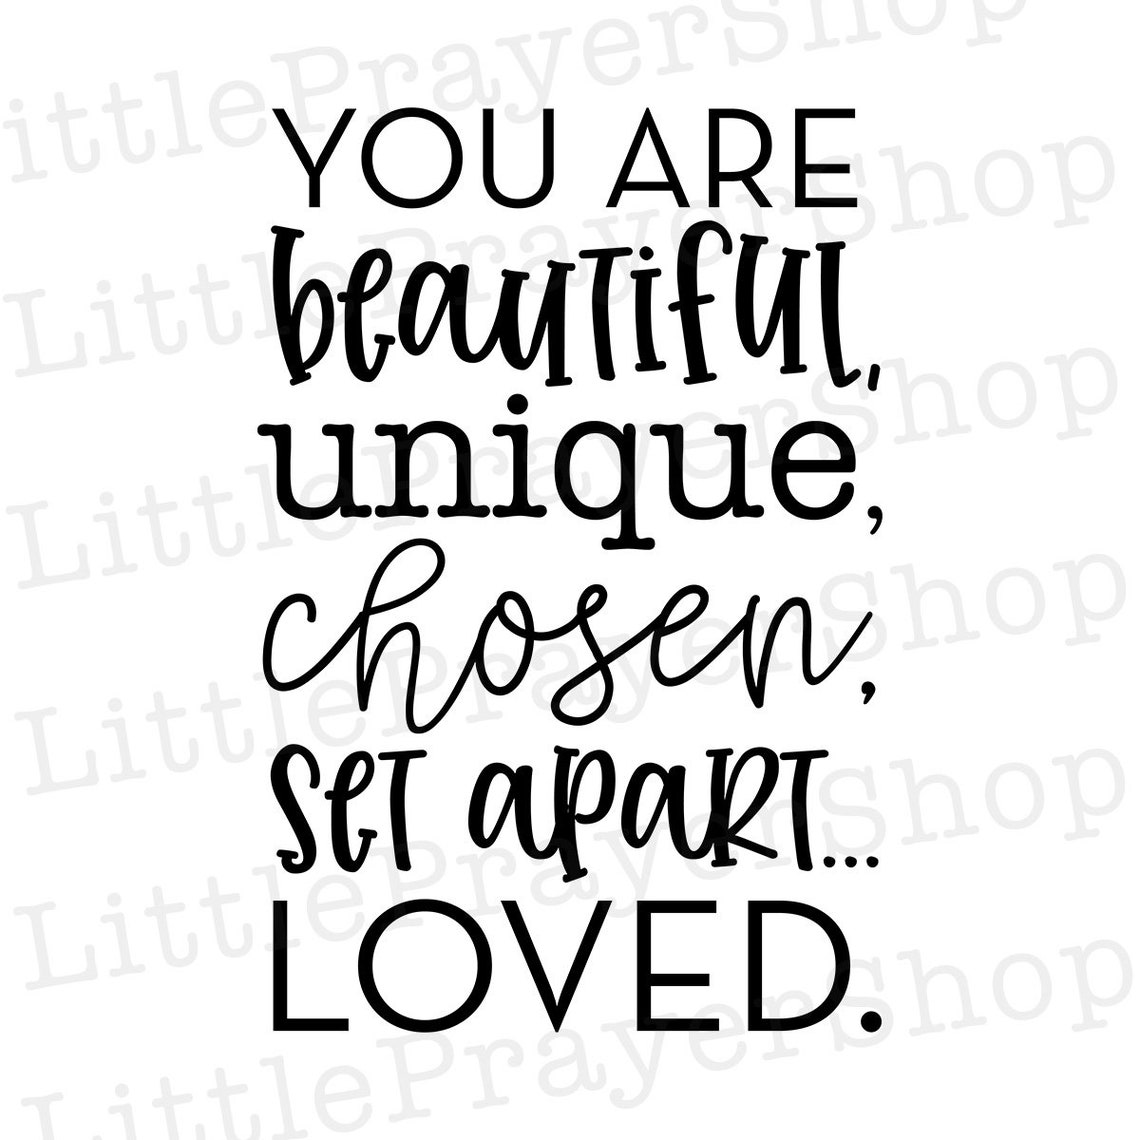 You Are Beautiful Unique Chosen Set Apart Loved SVG File | Etsy